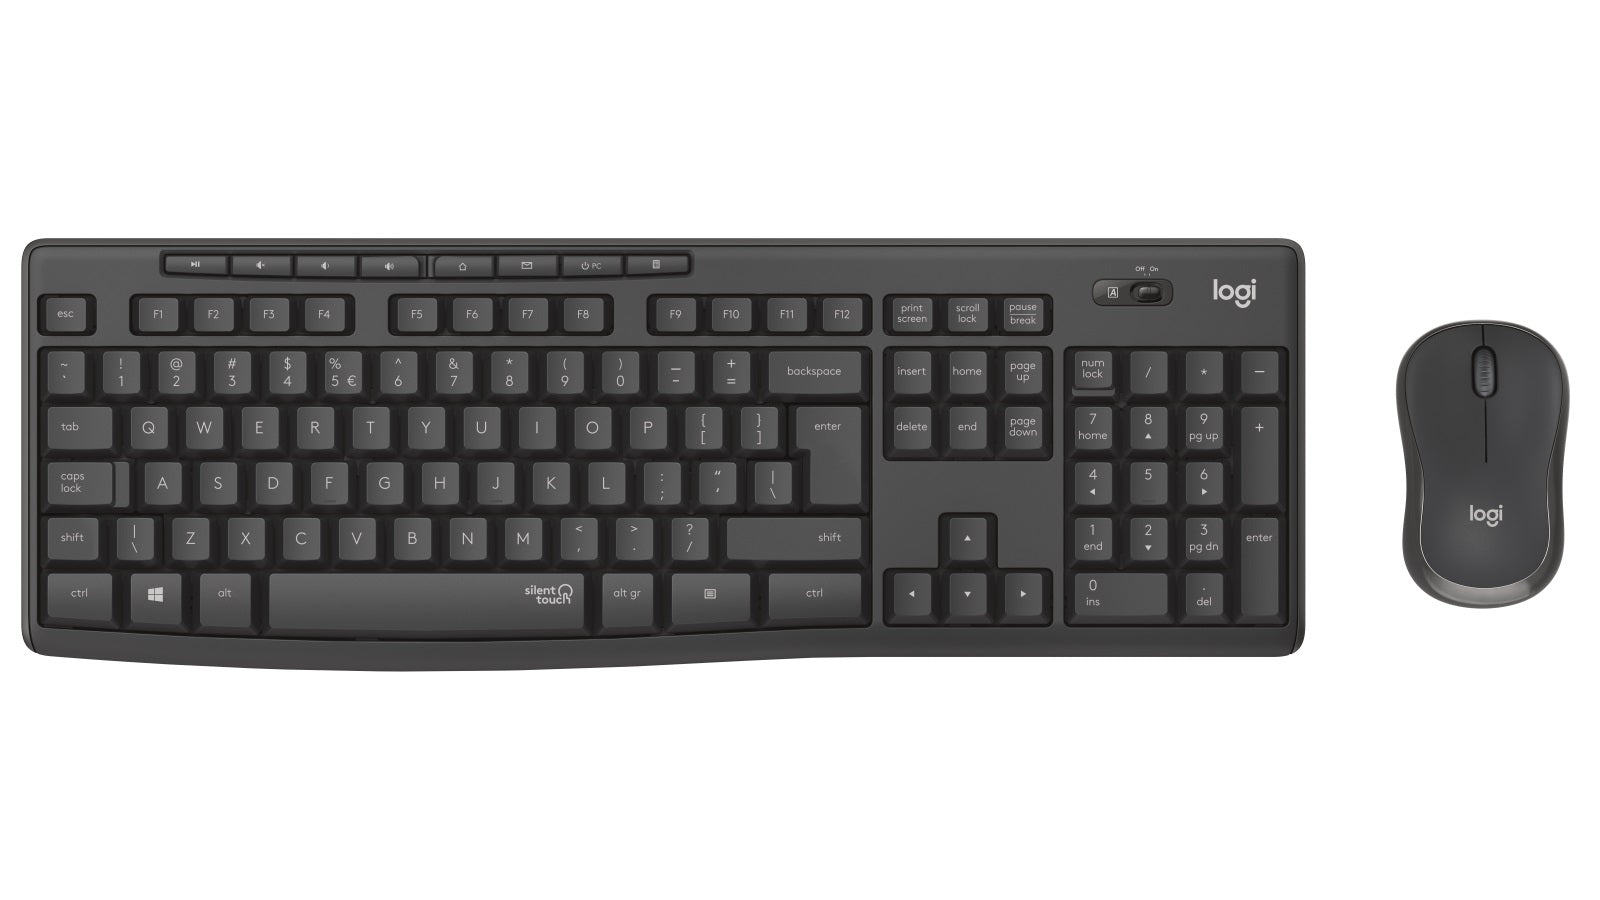 Logitech MK295 WIRELESS SILENT  KEYBOARD AND MOUSE COMBO, 2.4GHZ USB RECEIVER - 1YR WTY Logitech